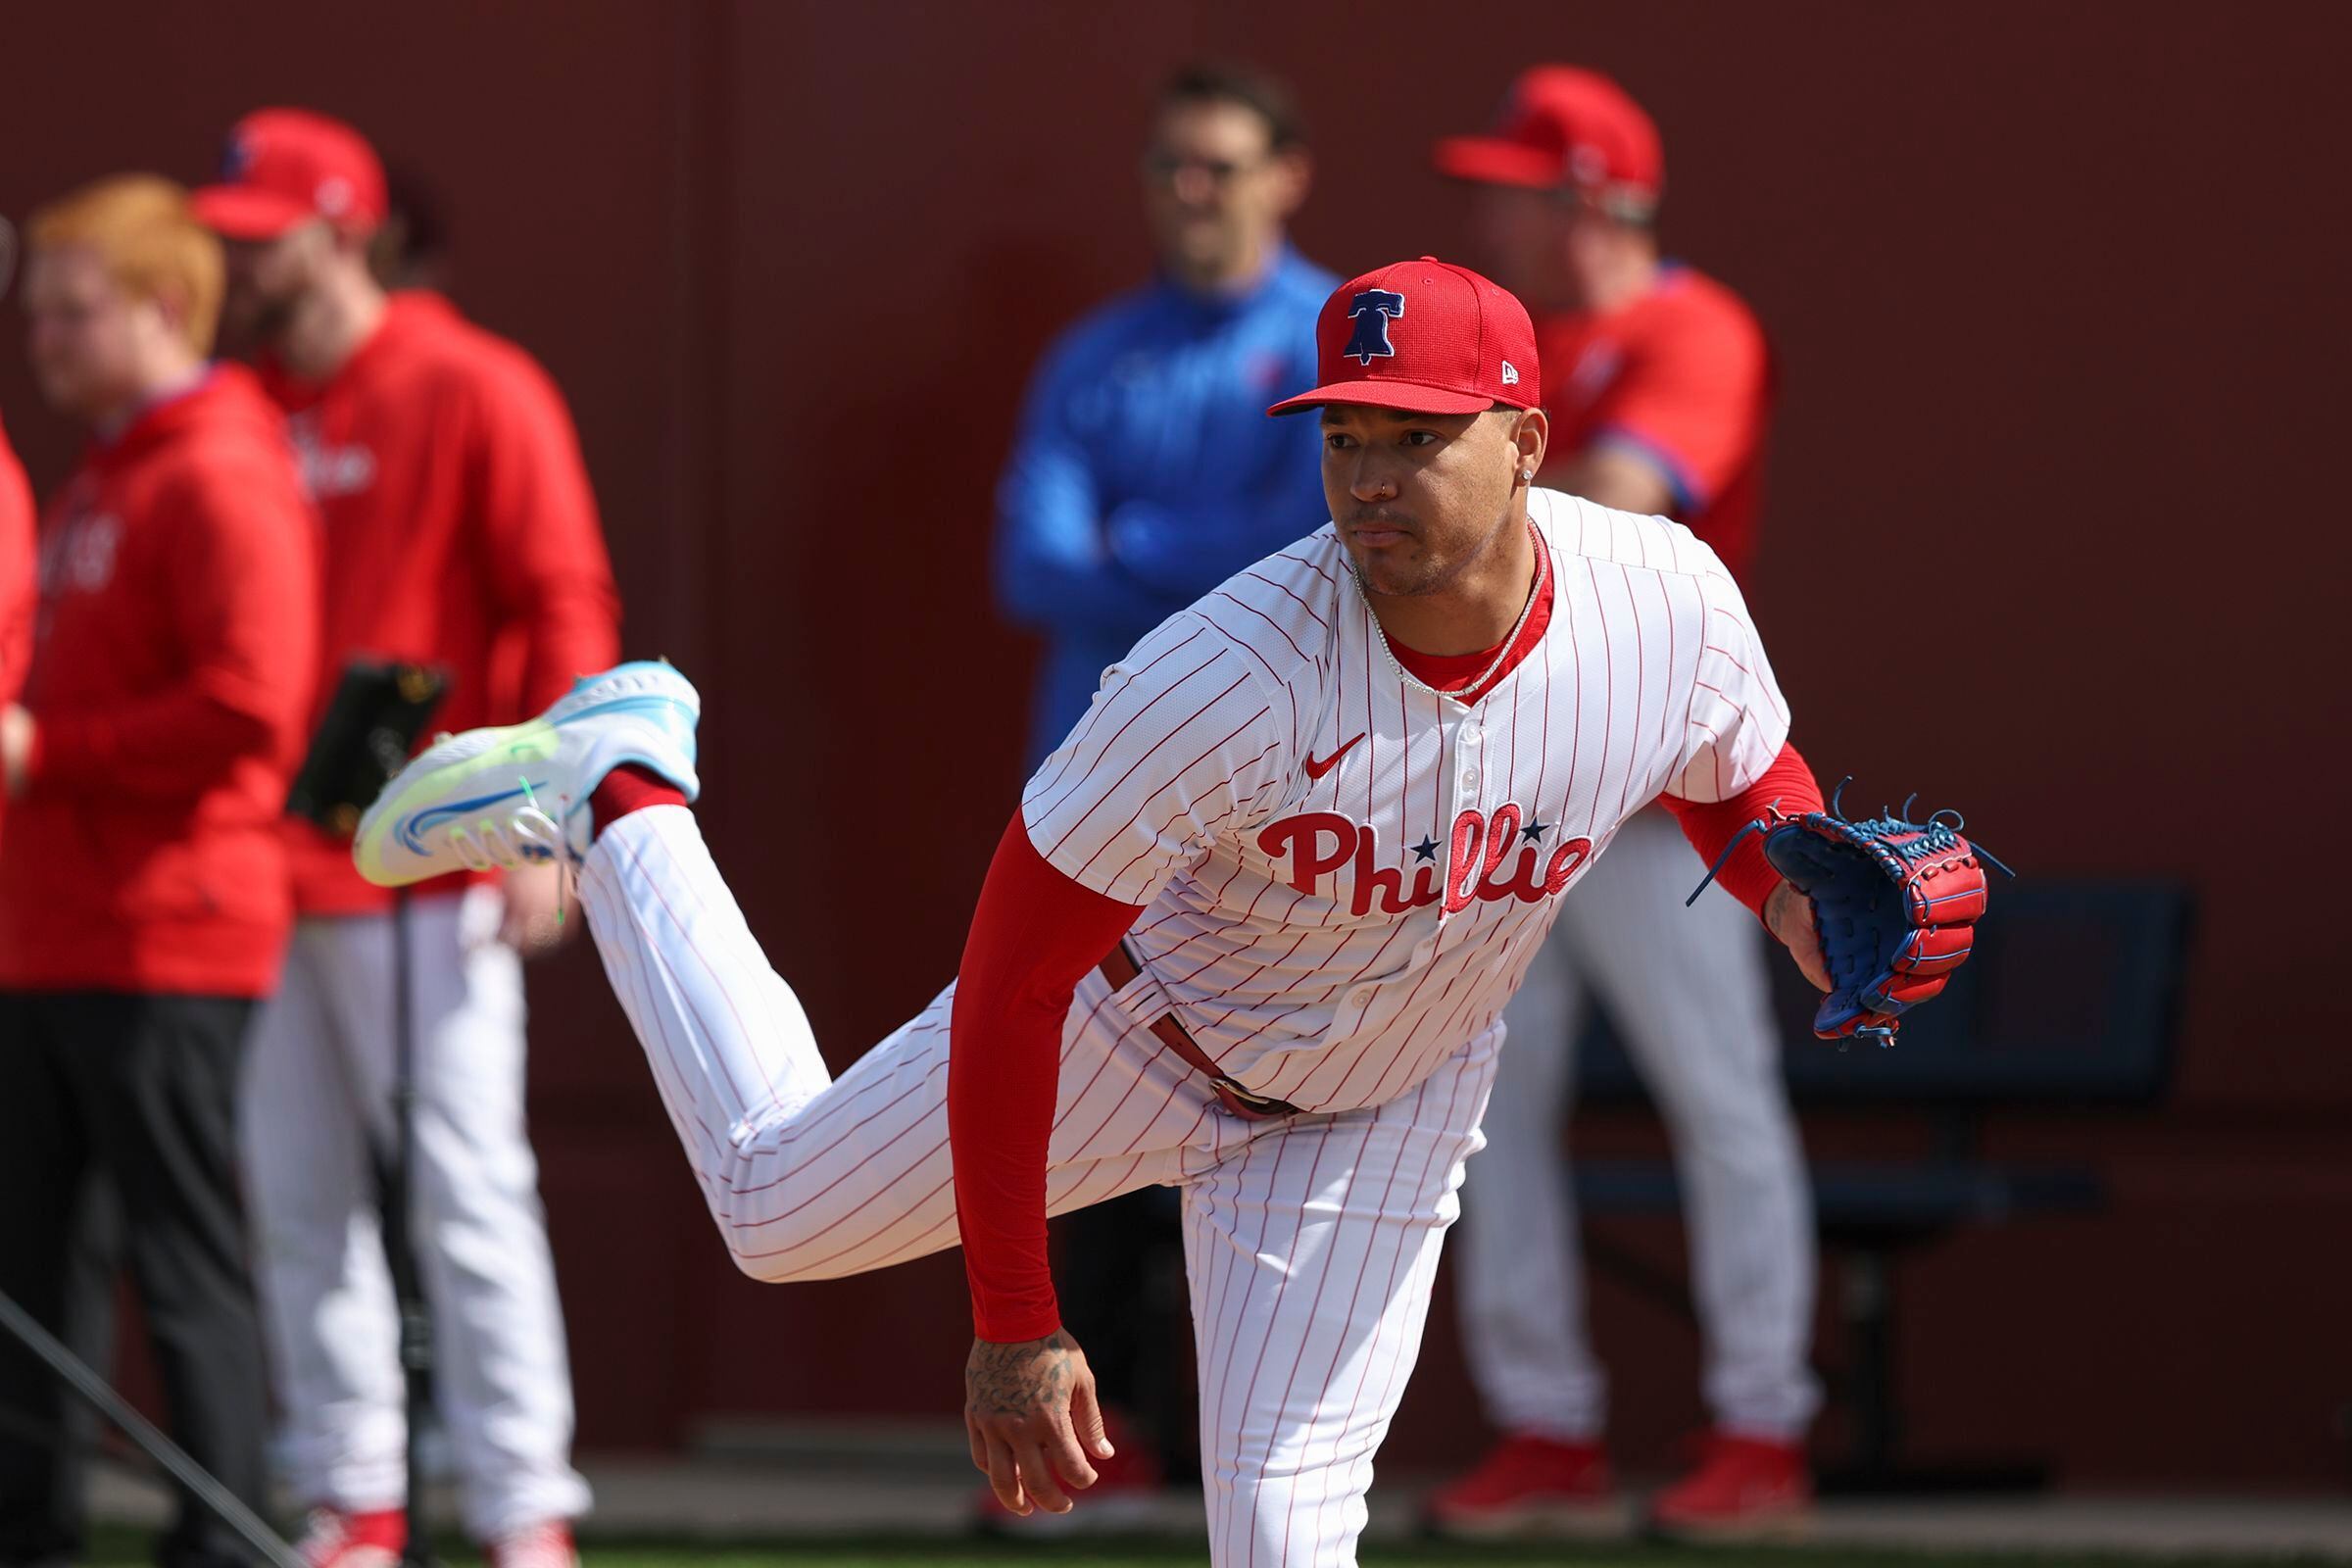 taijuan walker is ‘great’ with rob thomson and out to show the phillies there’s ‘no reason not to put me in’